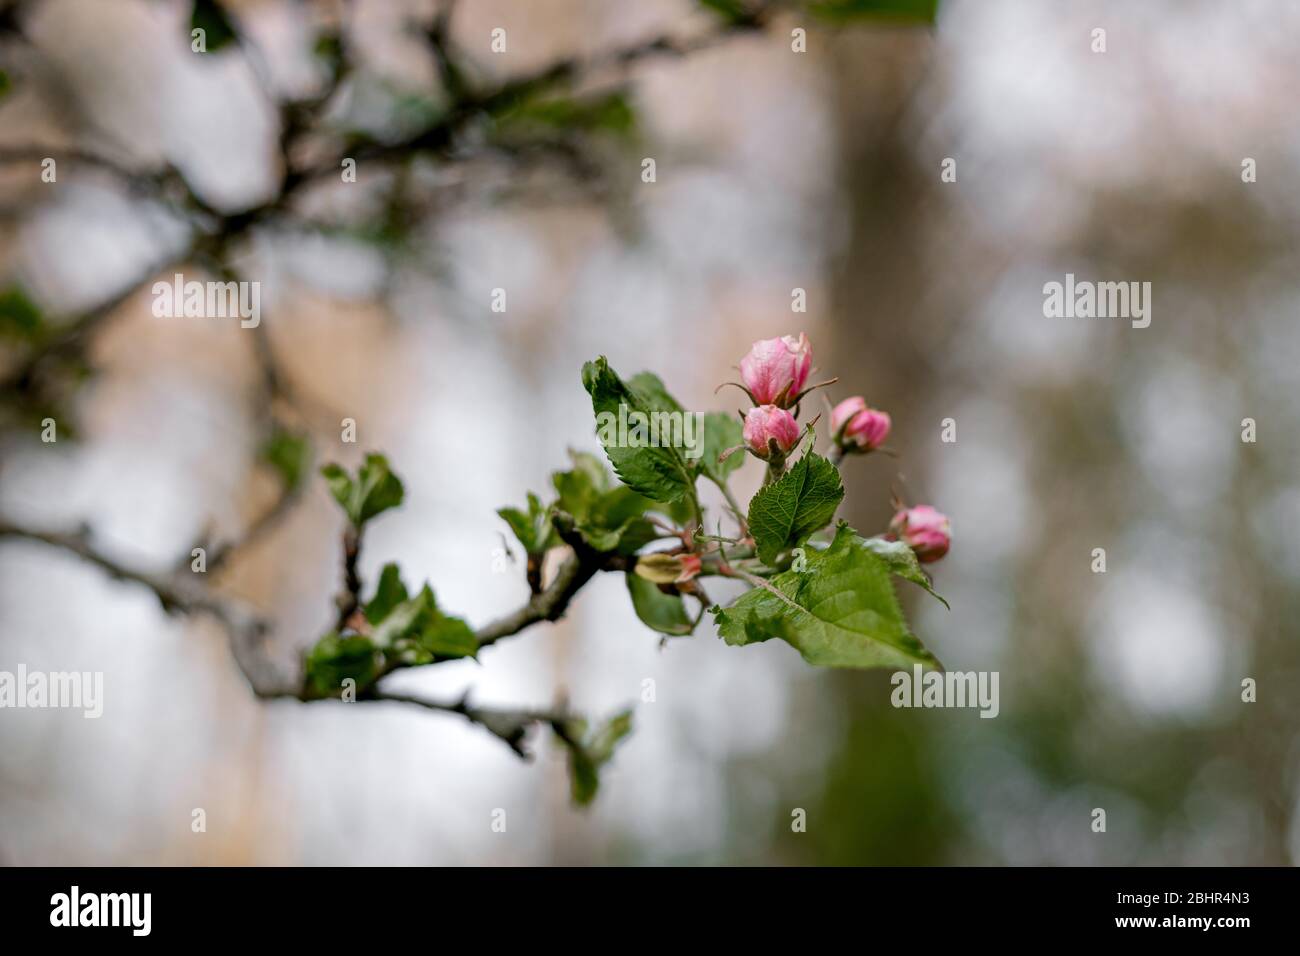 Apple blossom branches Stock Photo